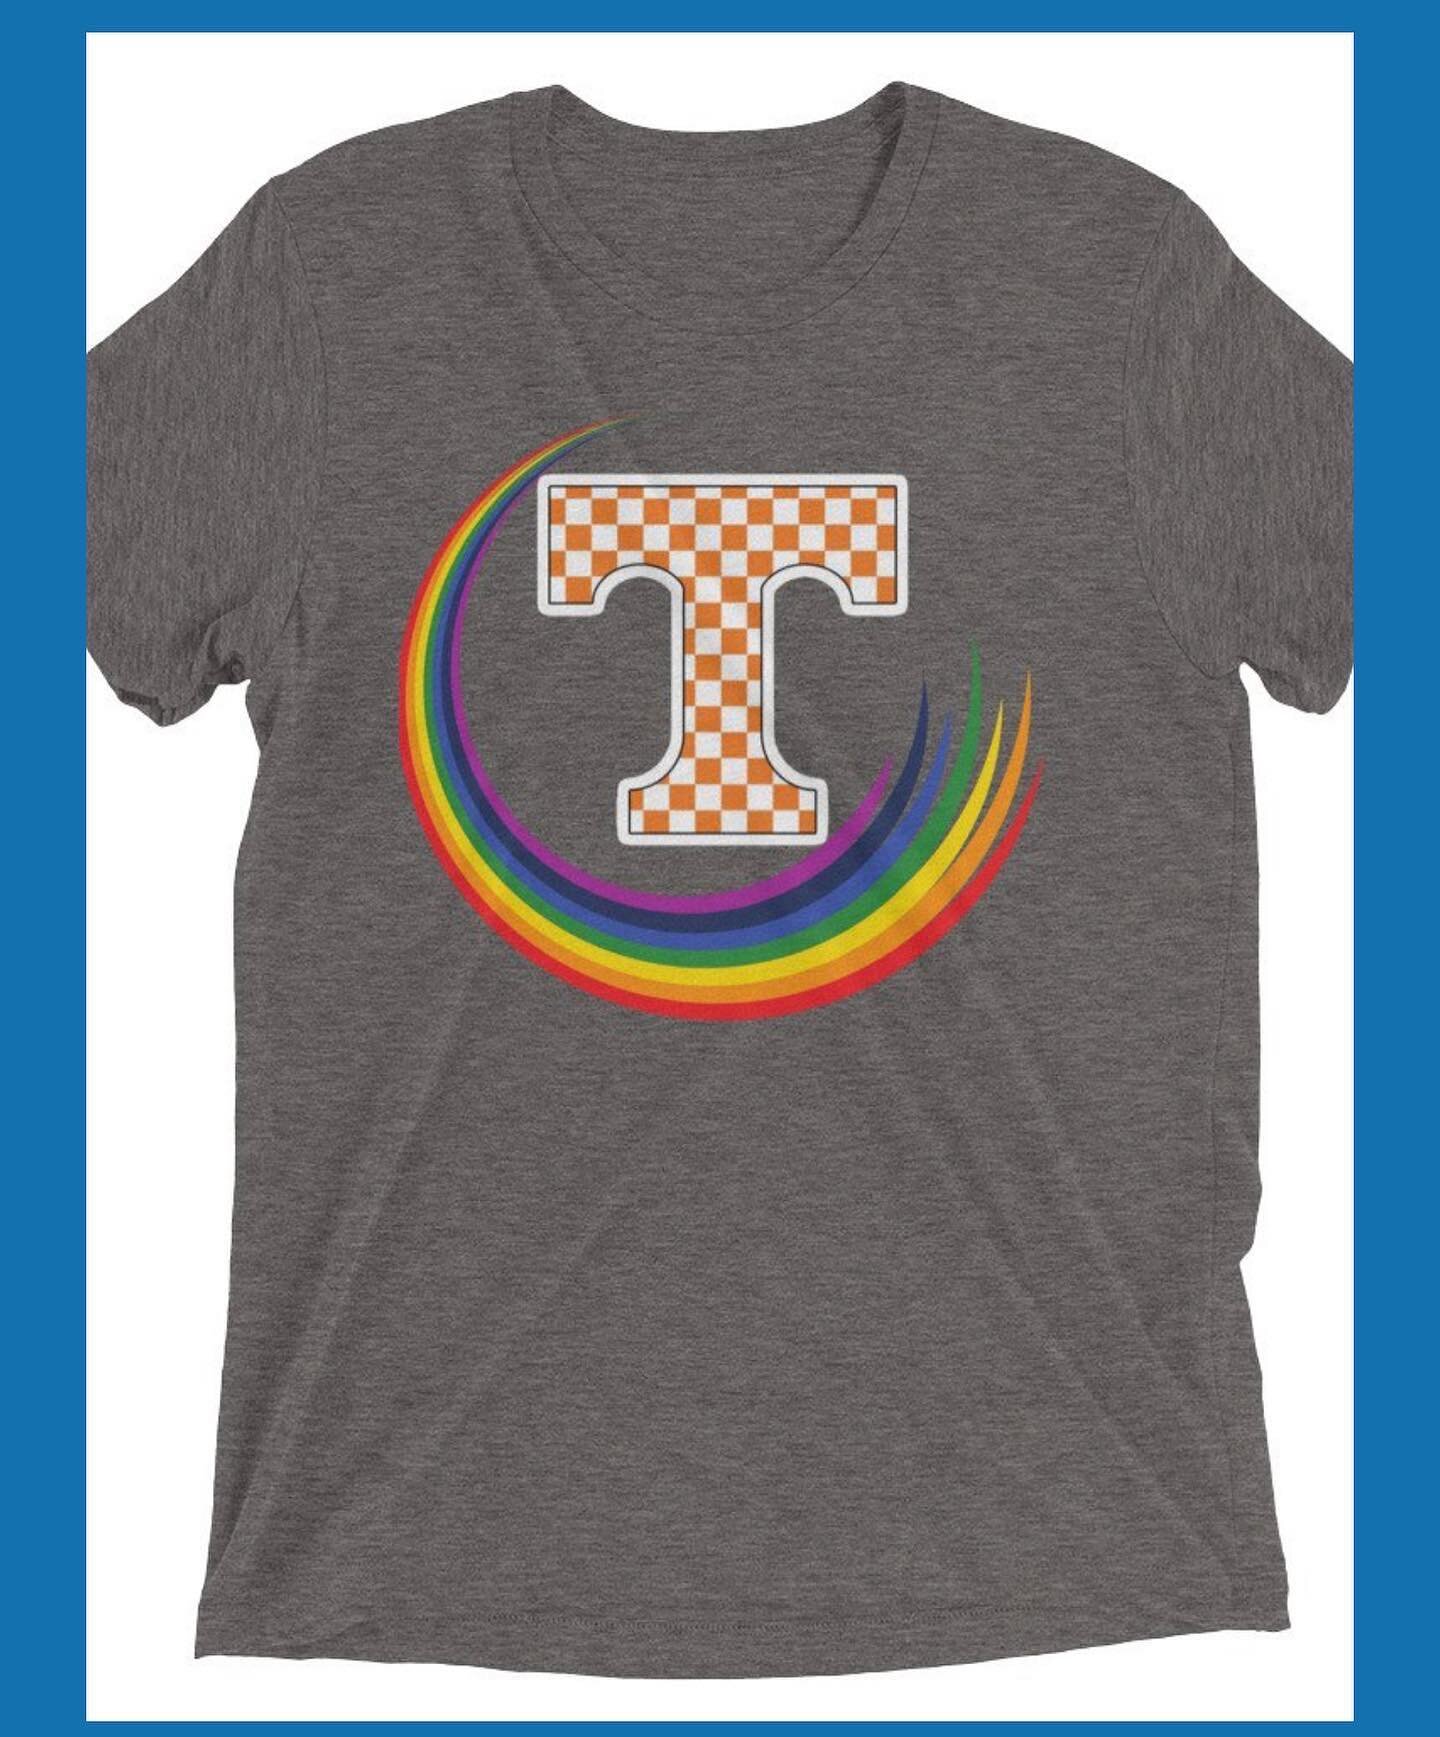 Yes! There 🌈s in Tennessee. #lgbt #tshirt #pride #tennessee #vols  www.mygoodshirt.shop